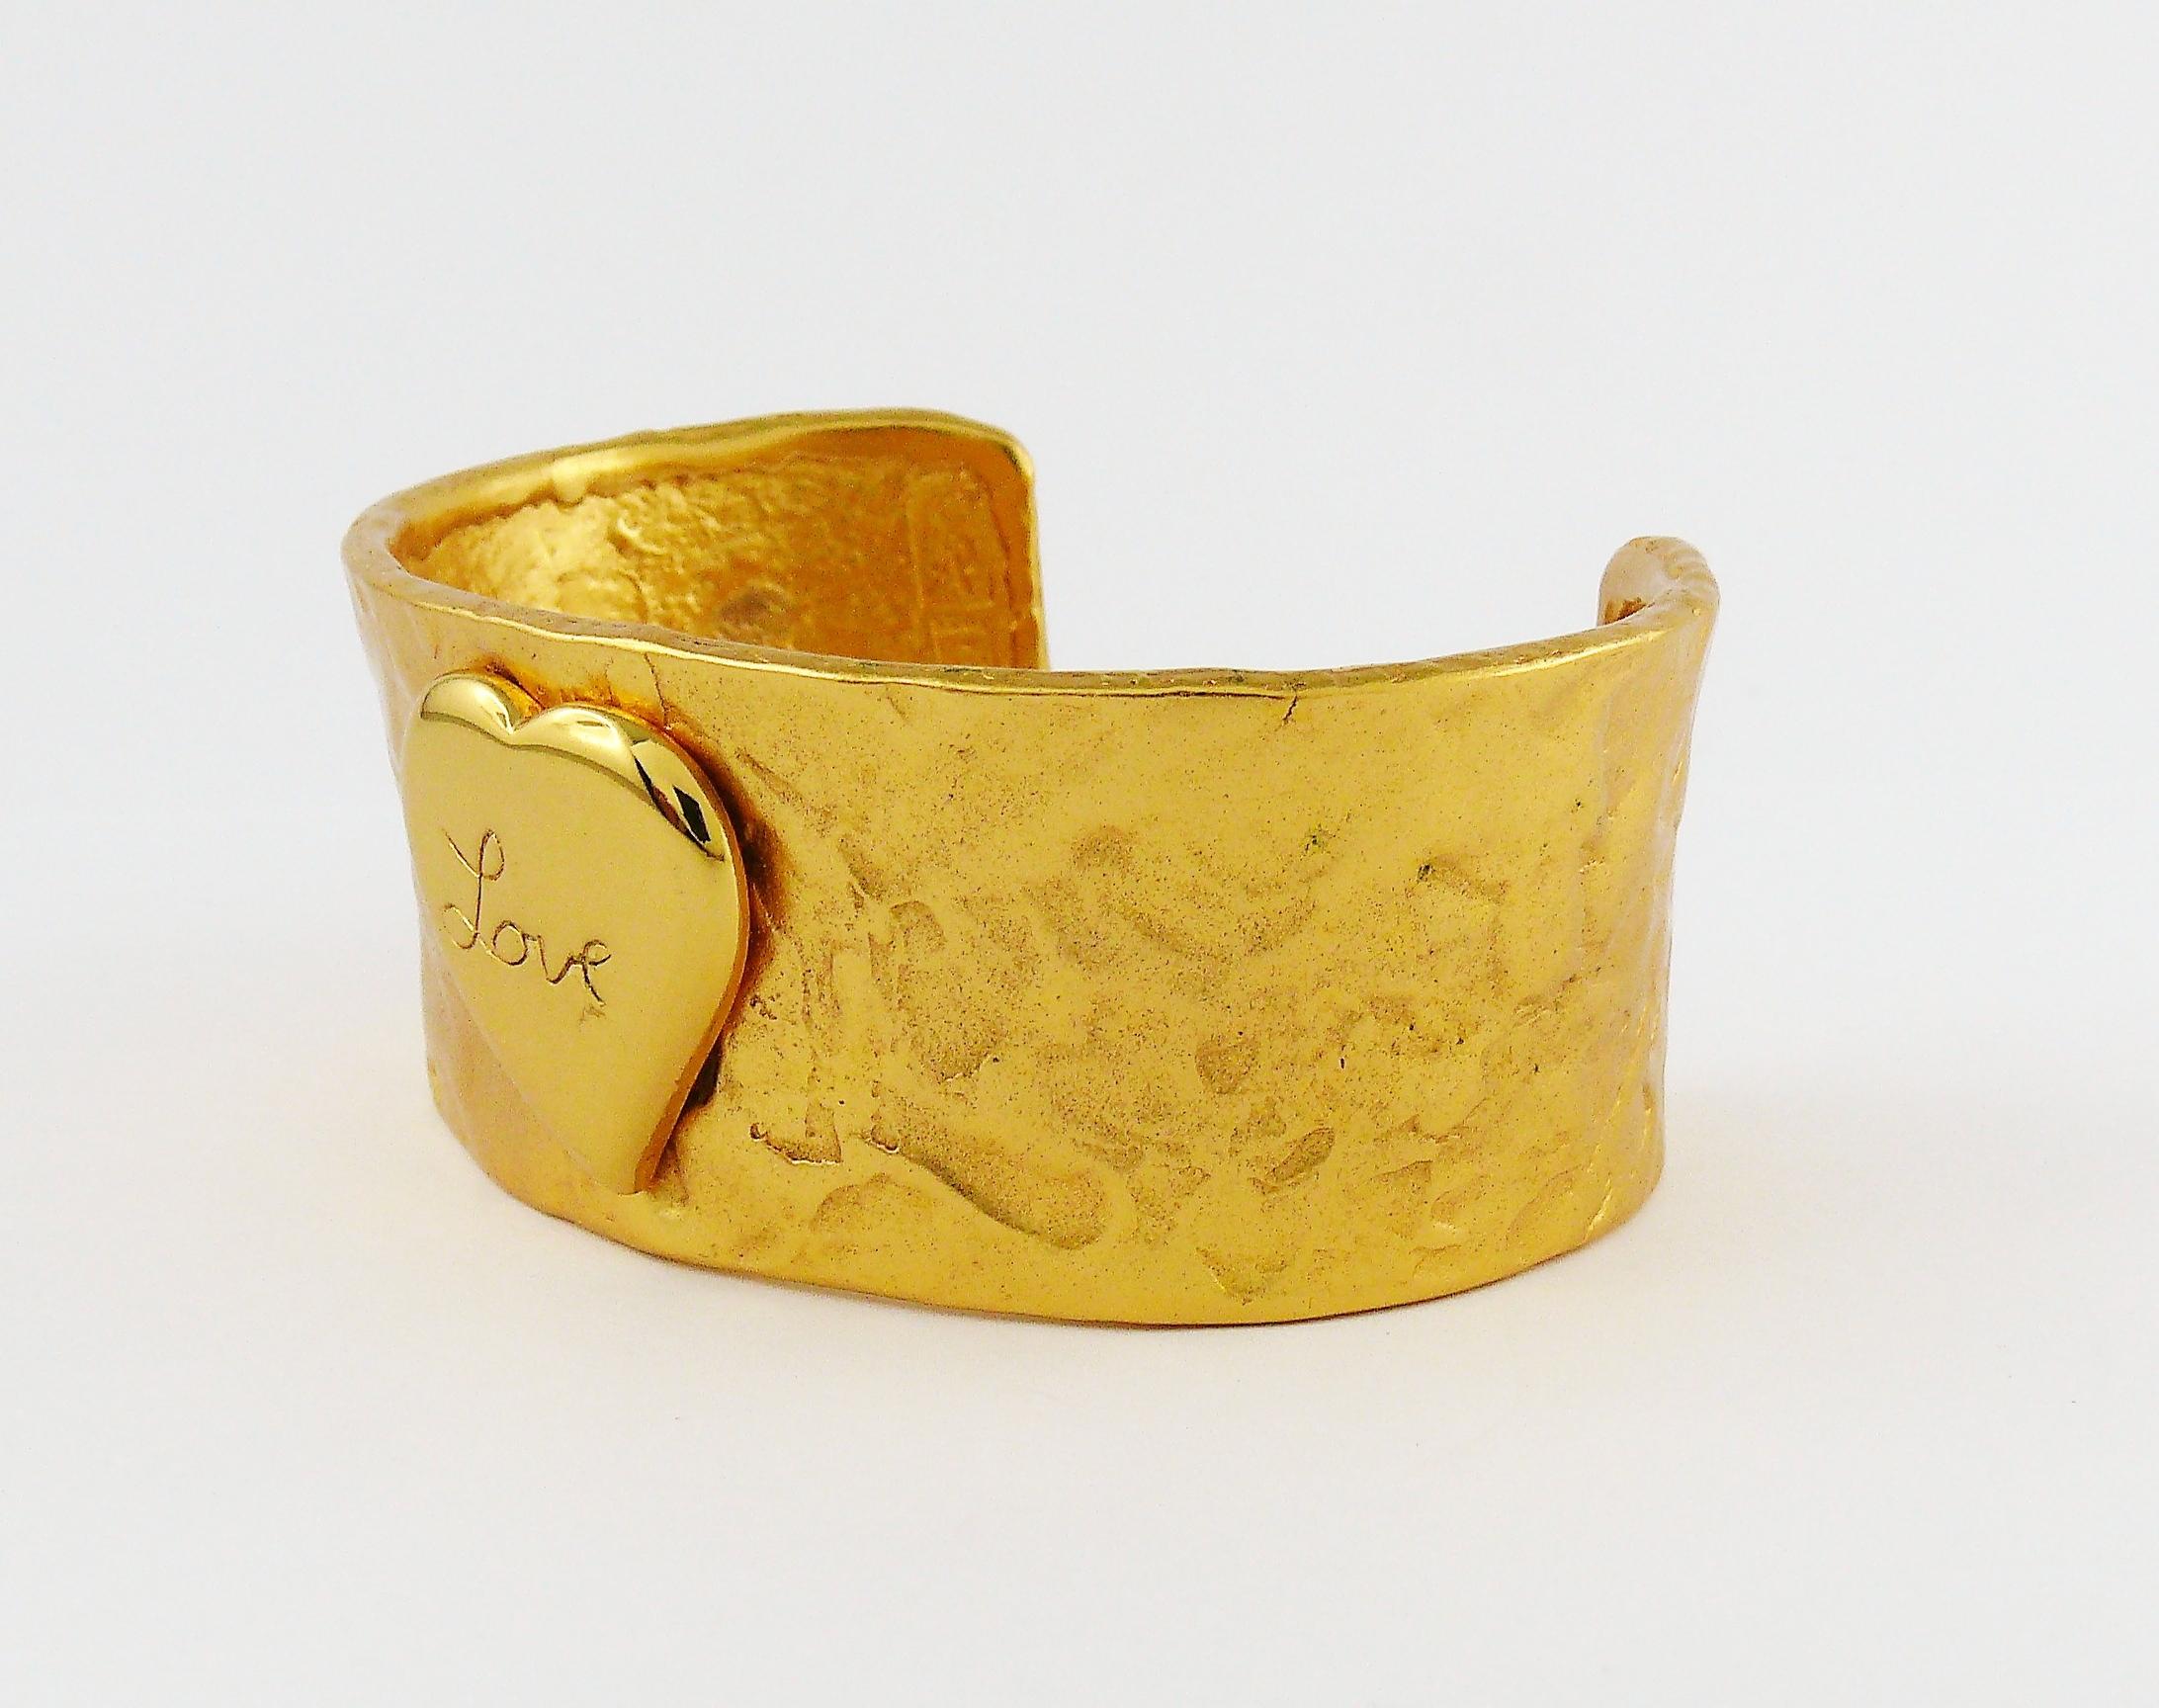 Yves Saint Laurent Vintage Love Heart Hammered Cuff Bracelet In Good Condition For Sale In Nice, FR